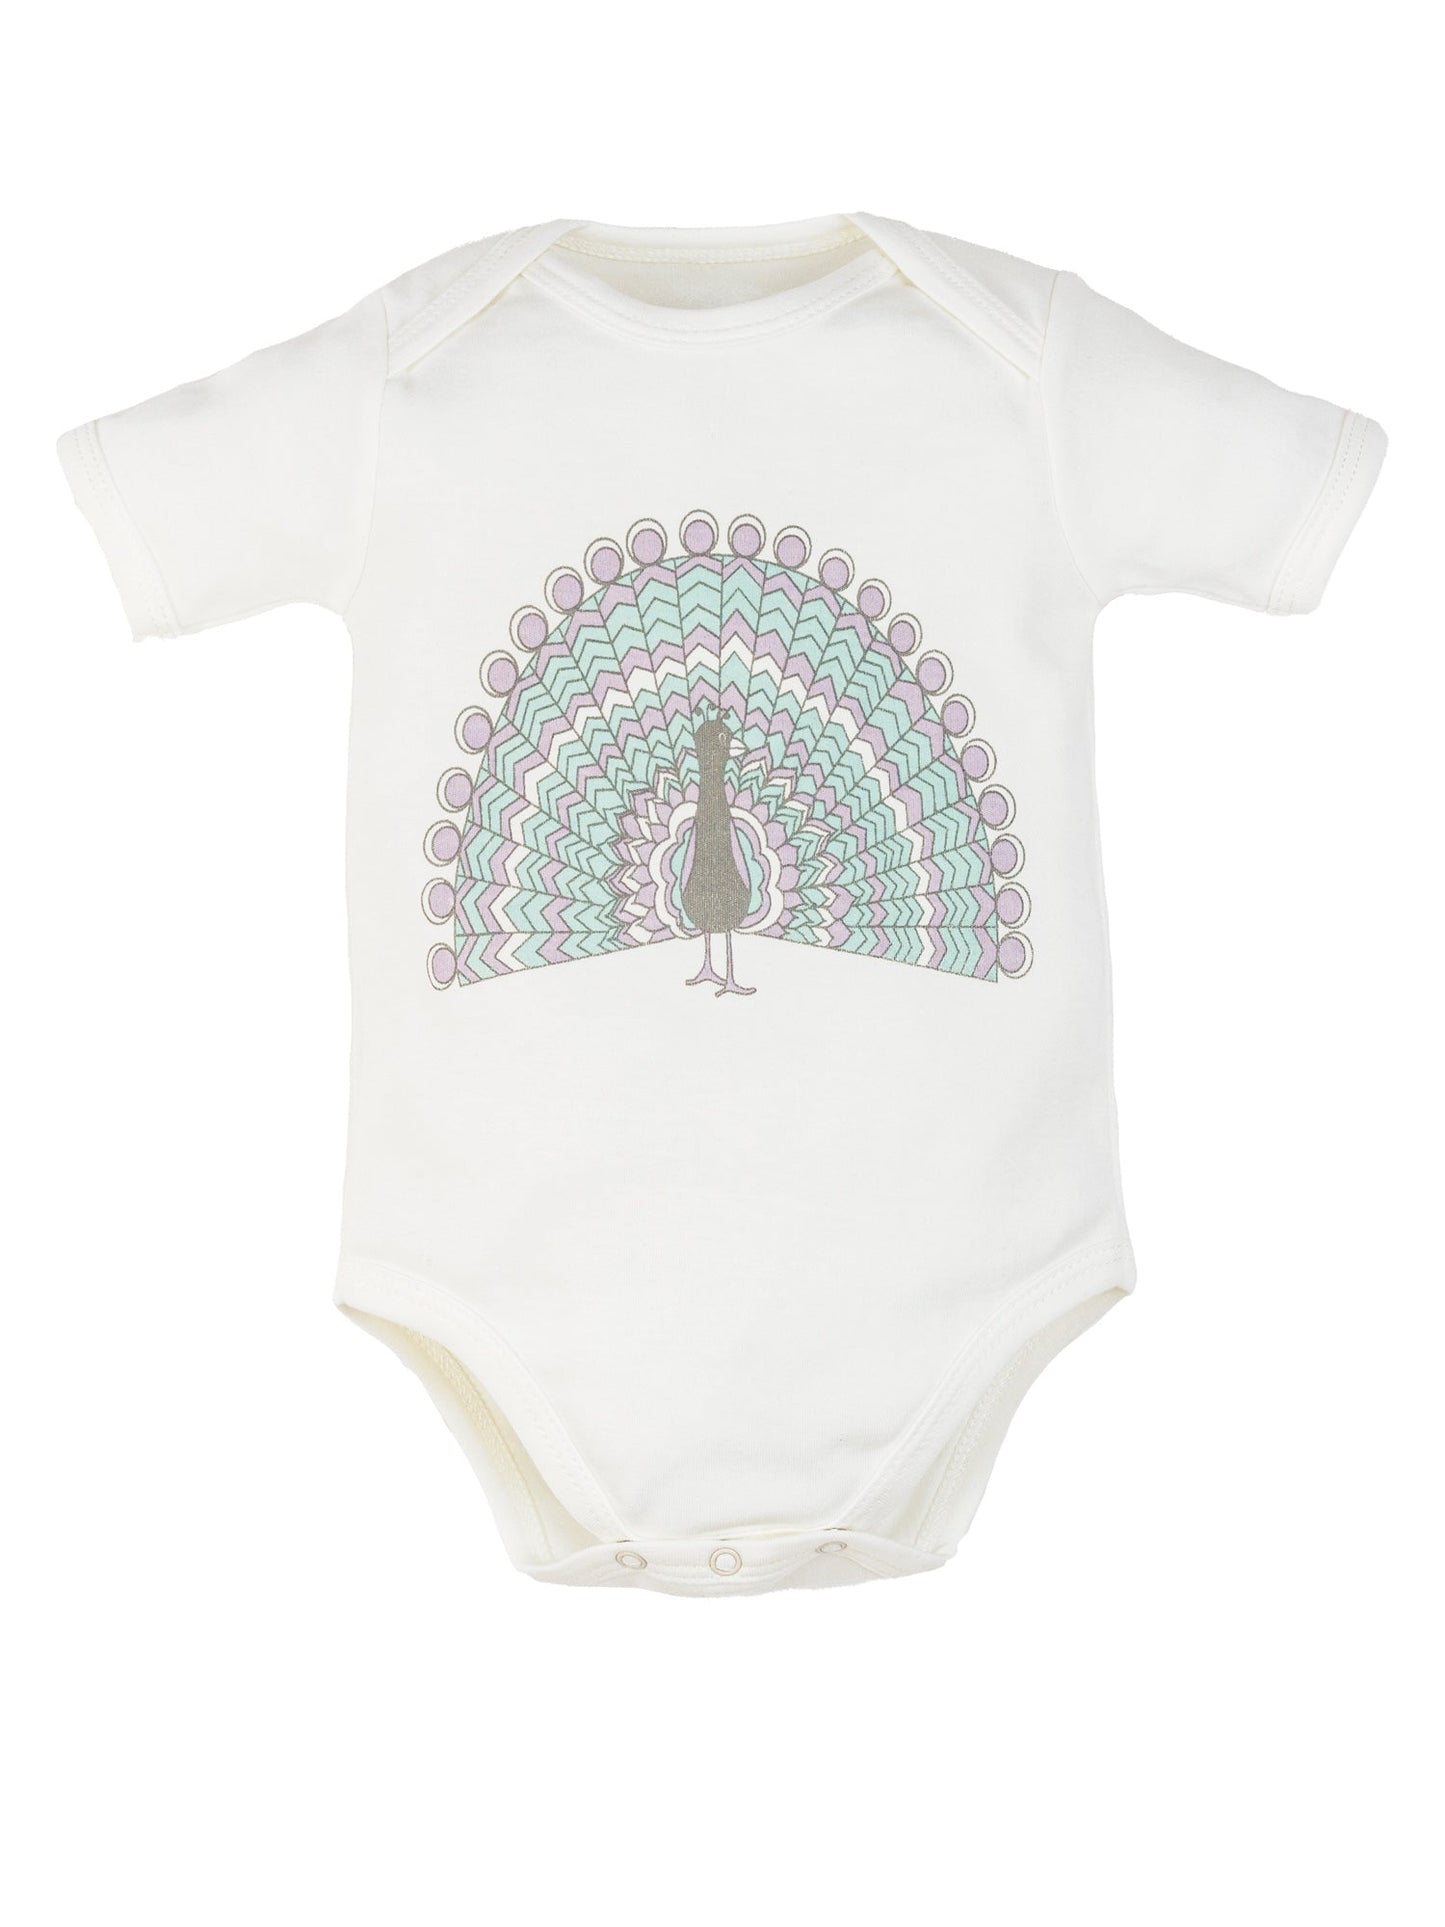 Unisex Baby bodysuit – Short sleeves- Made with Egyptian Organic Cotton - New Baby essentials